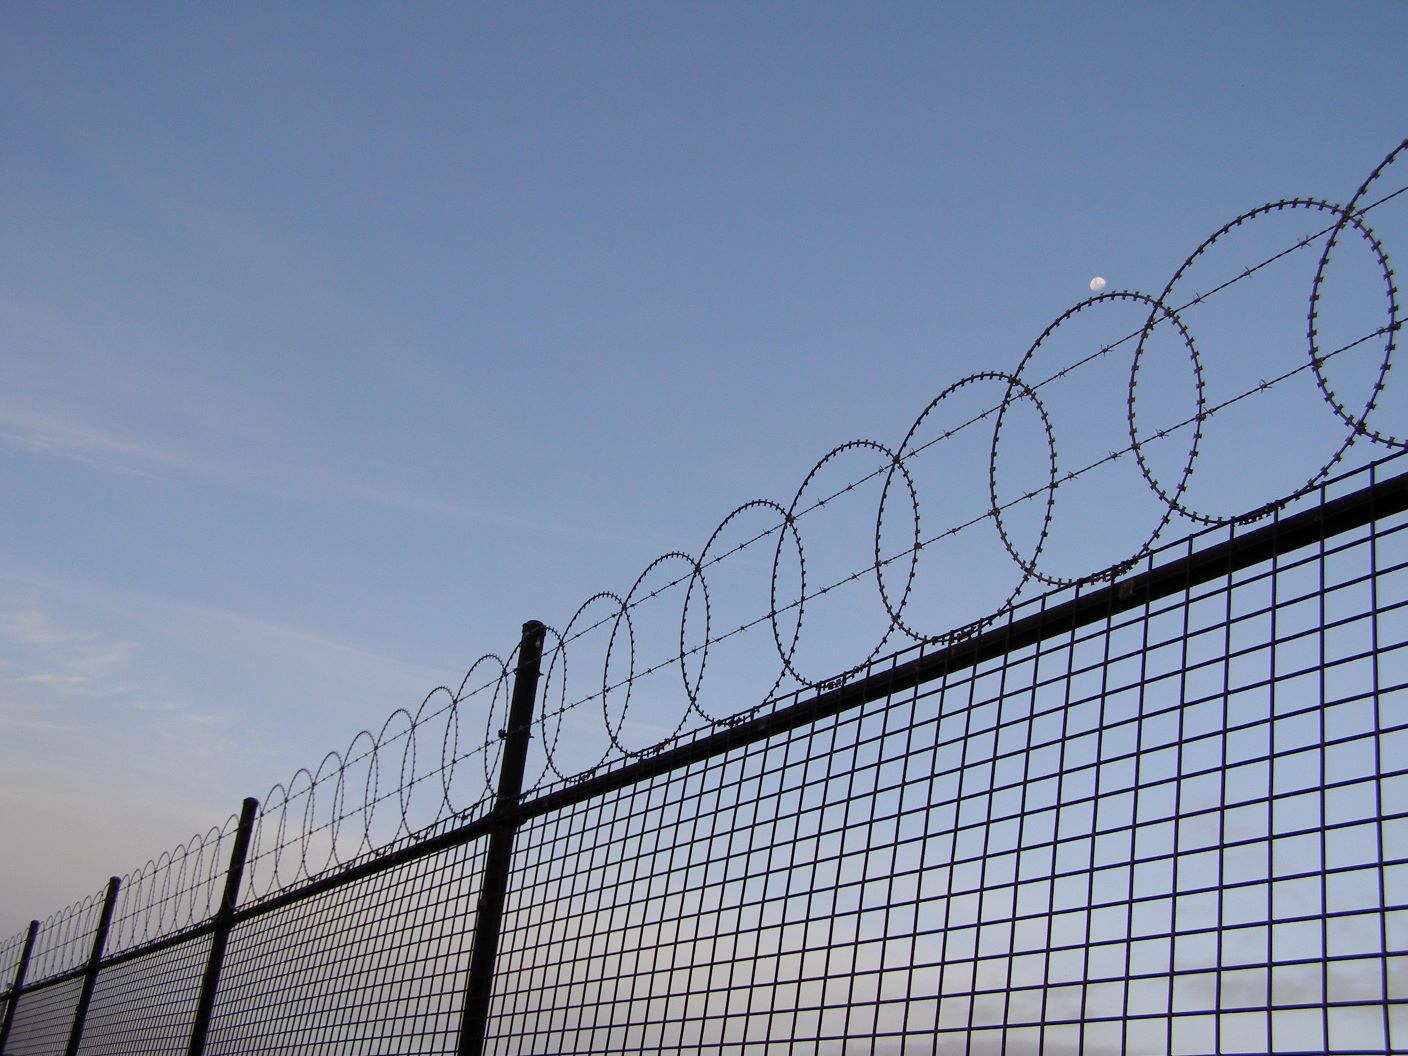 Fencing outside an American prison